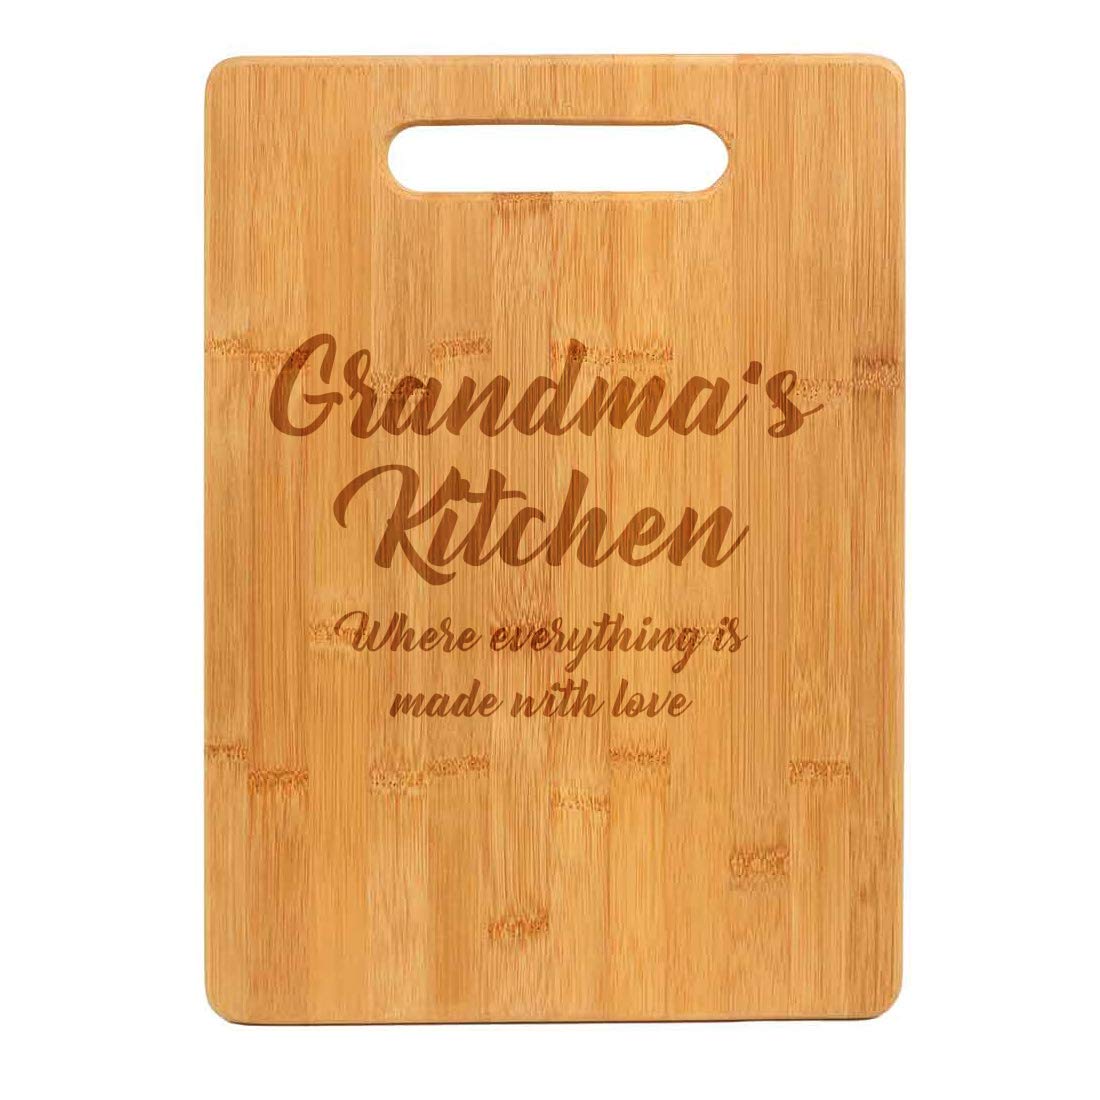 Bamboo Wood Cutting Board Grandma's Kitchen Where Everything Is Made With Love Mother